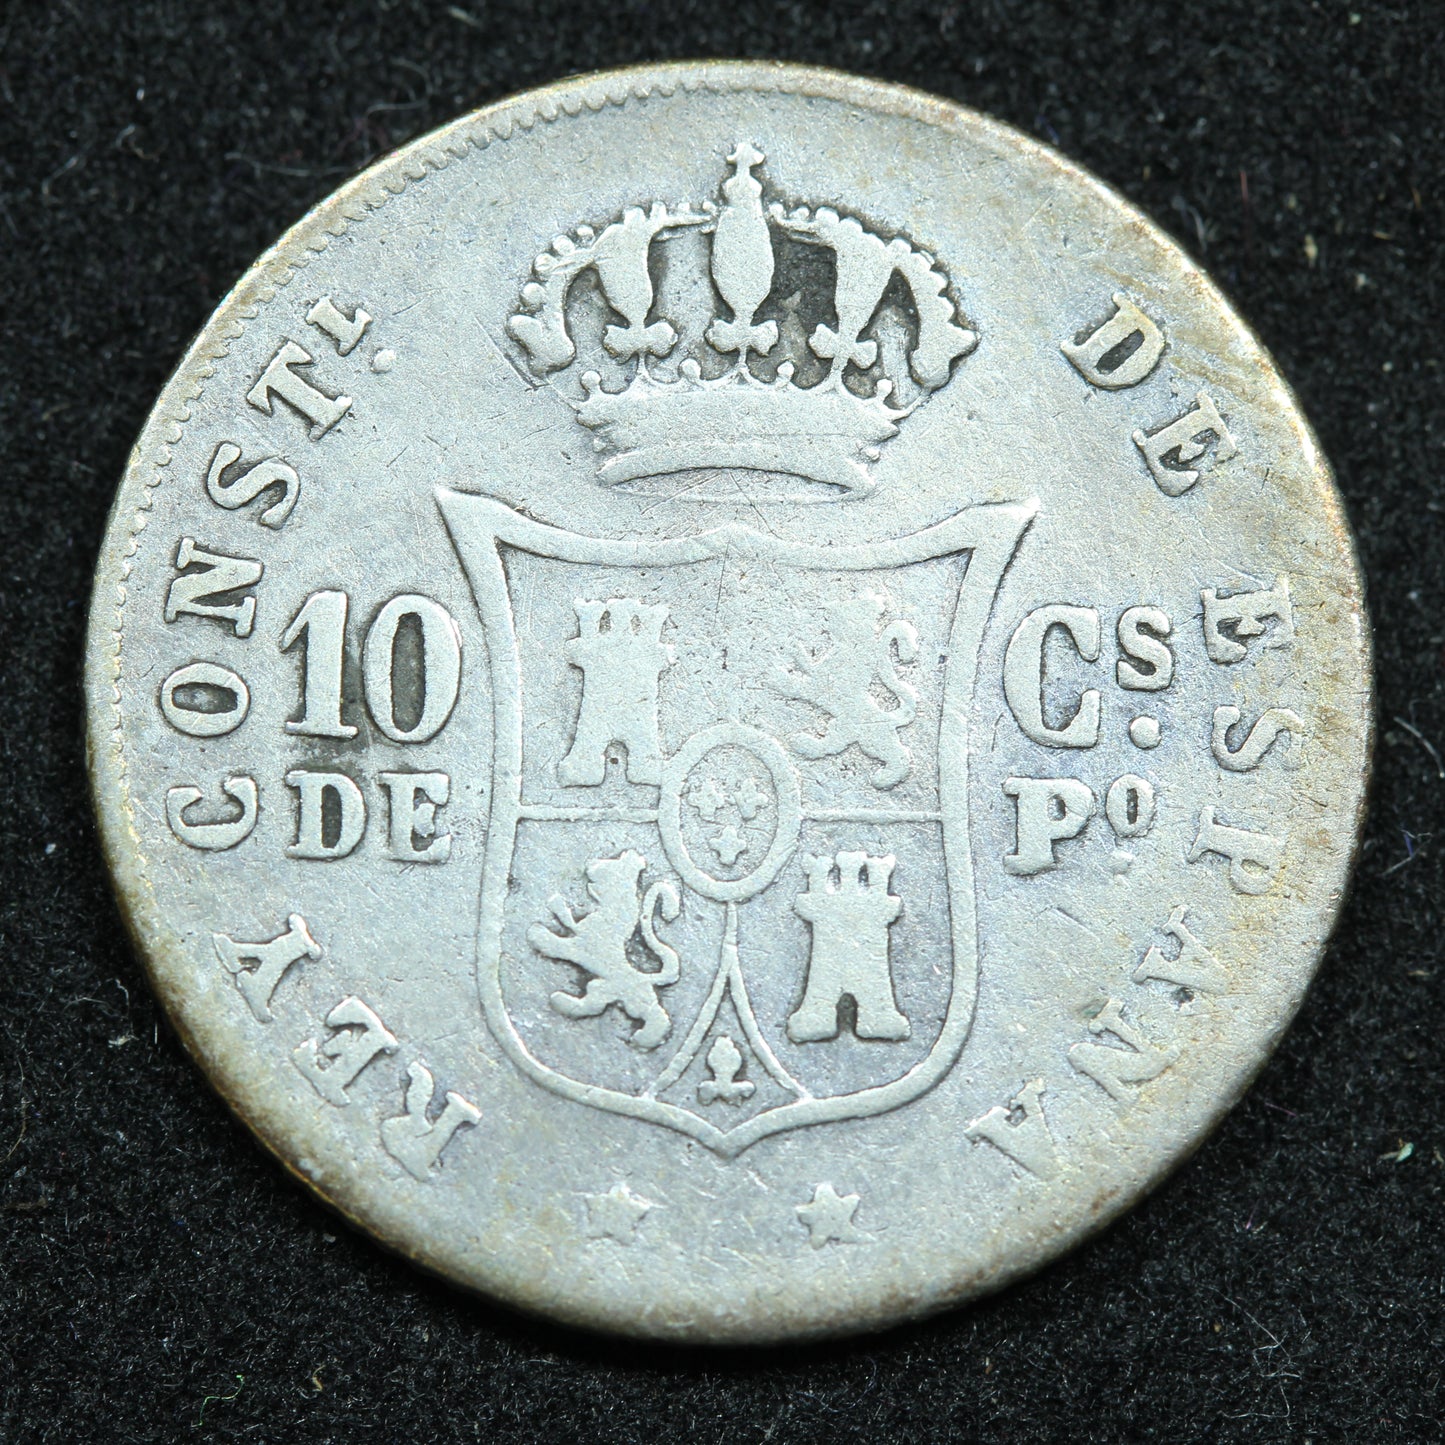 1885 10 Centimos Philippines Silver Coin - Alfonso XII - KM# 148